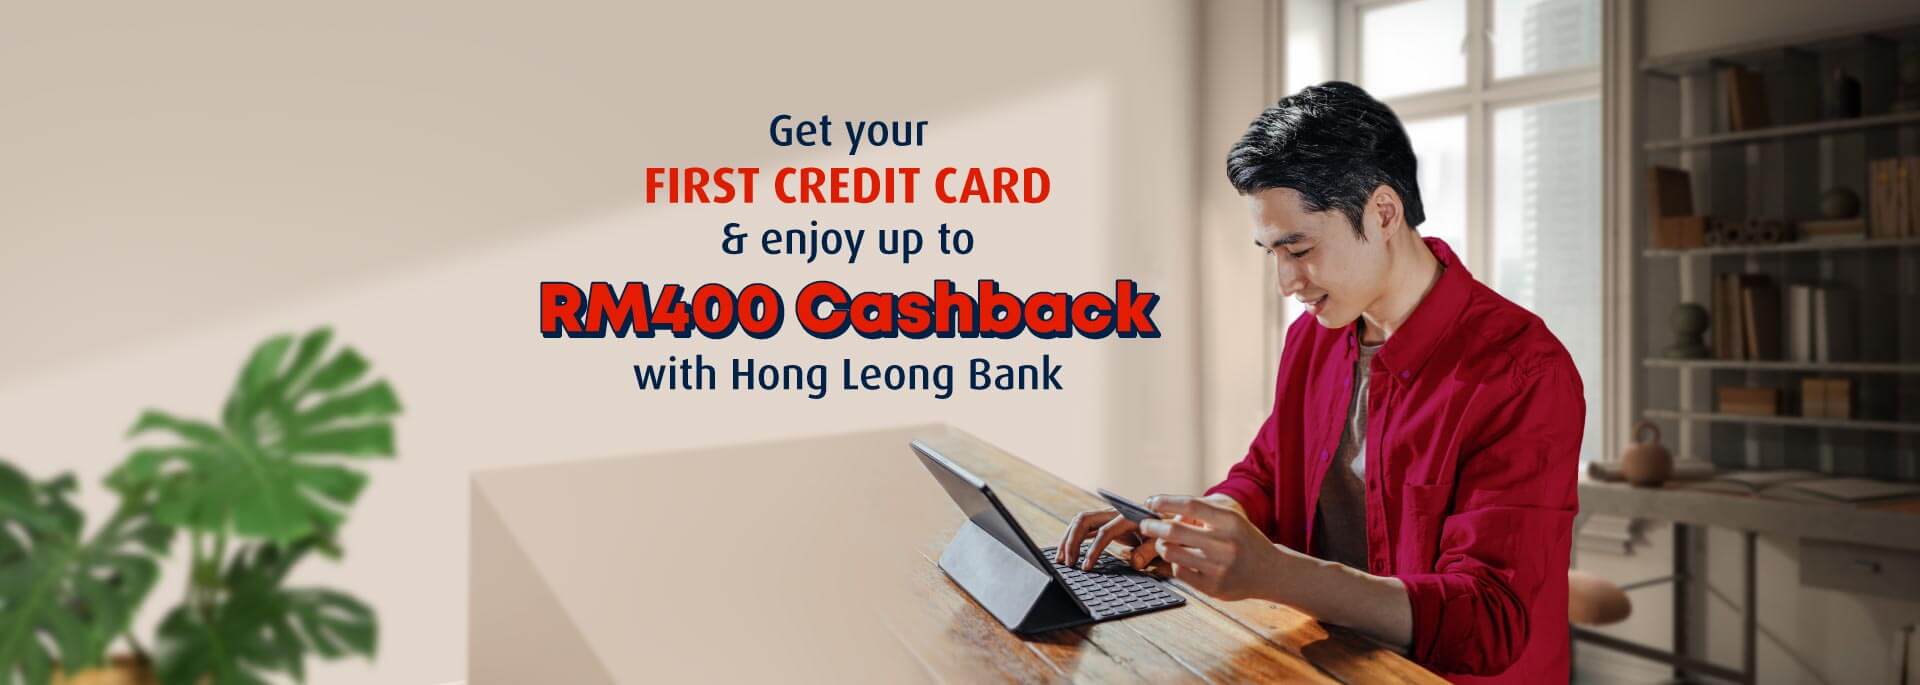 Get your First Credit Card & enjoy up to RM325 Cashback with Hong Leong Bank